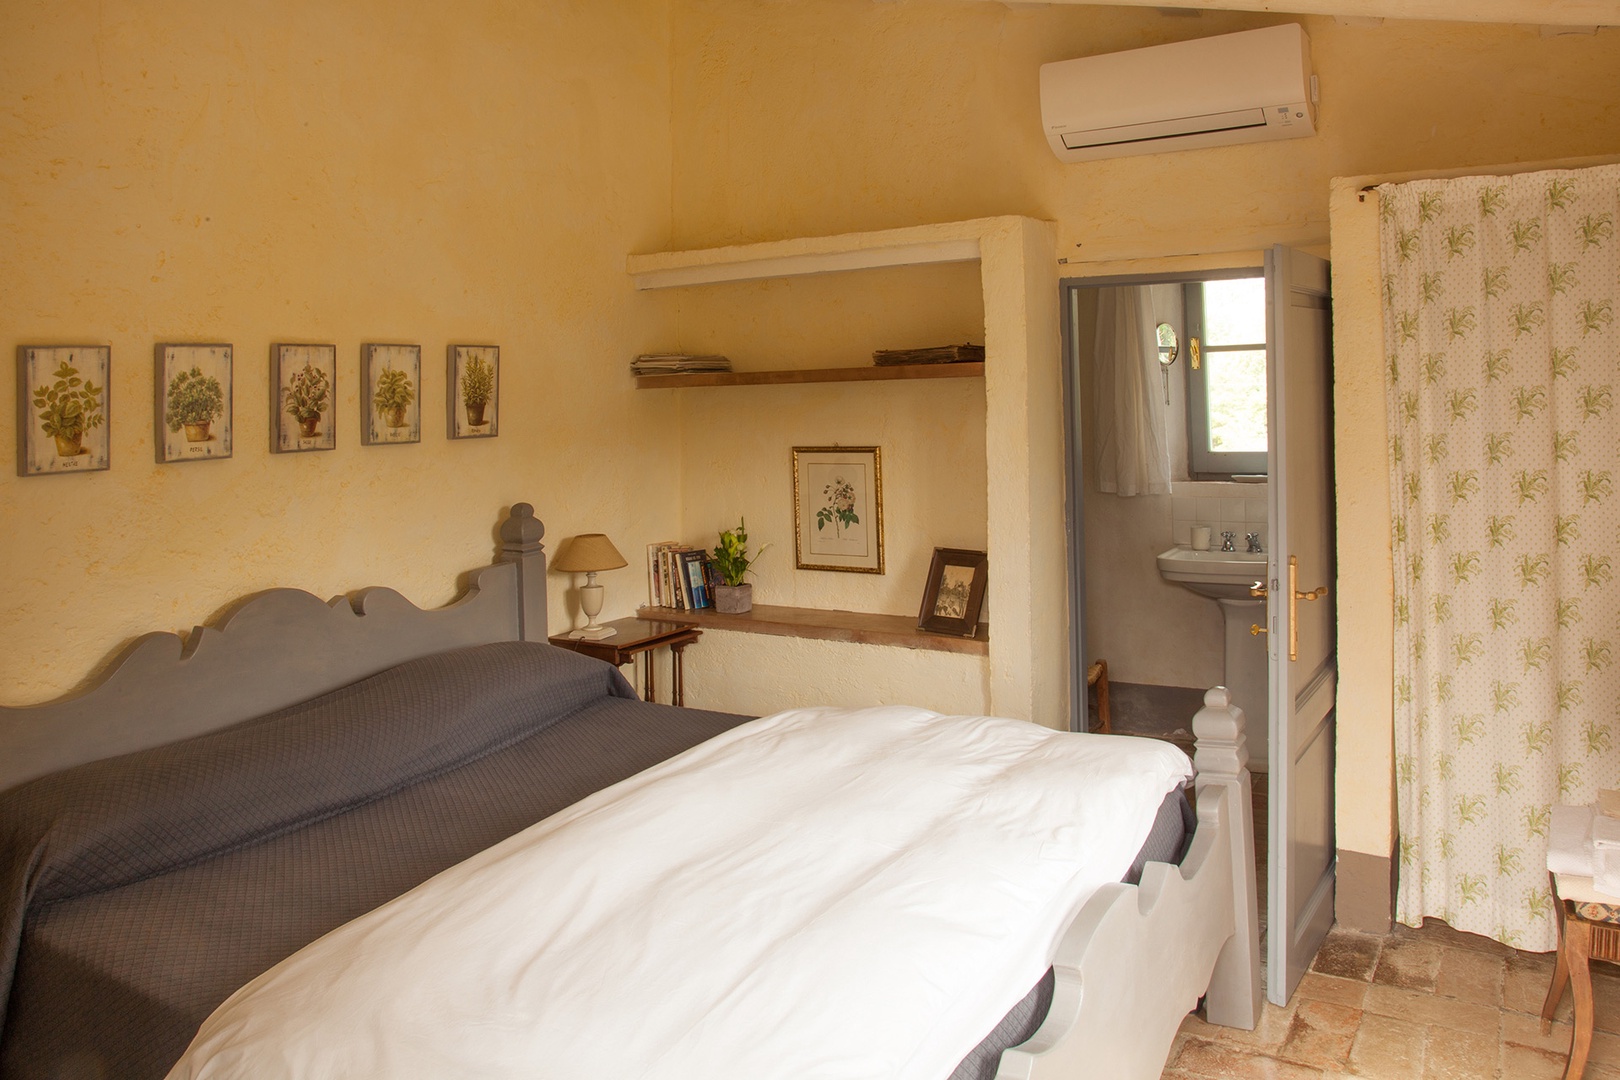 Bedroom 2 is independent with en suite bathroom. It is accessed from outside the house.